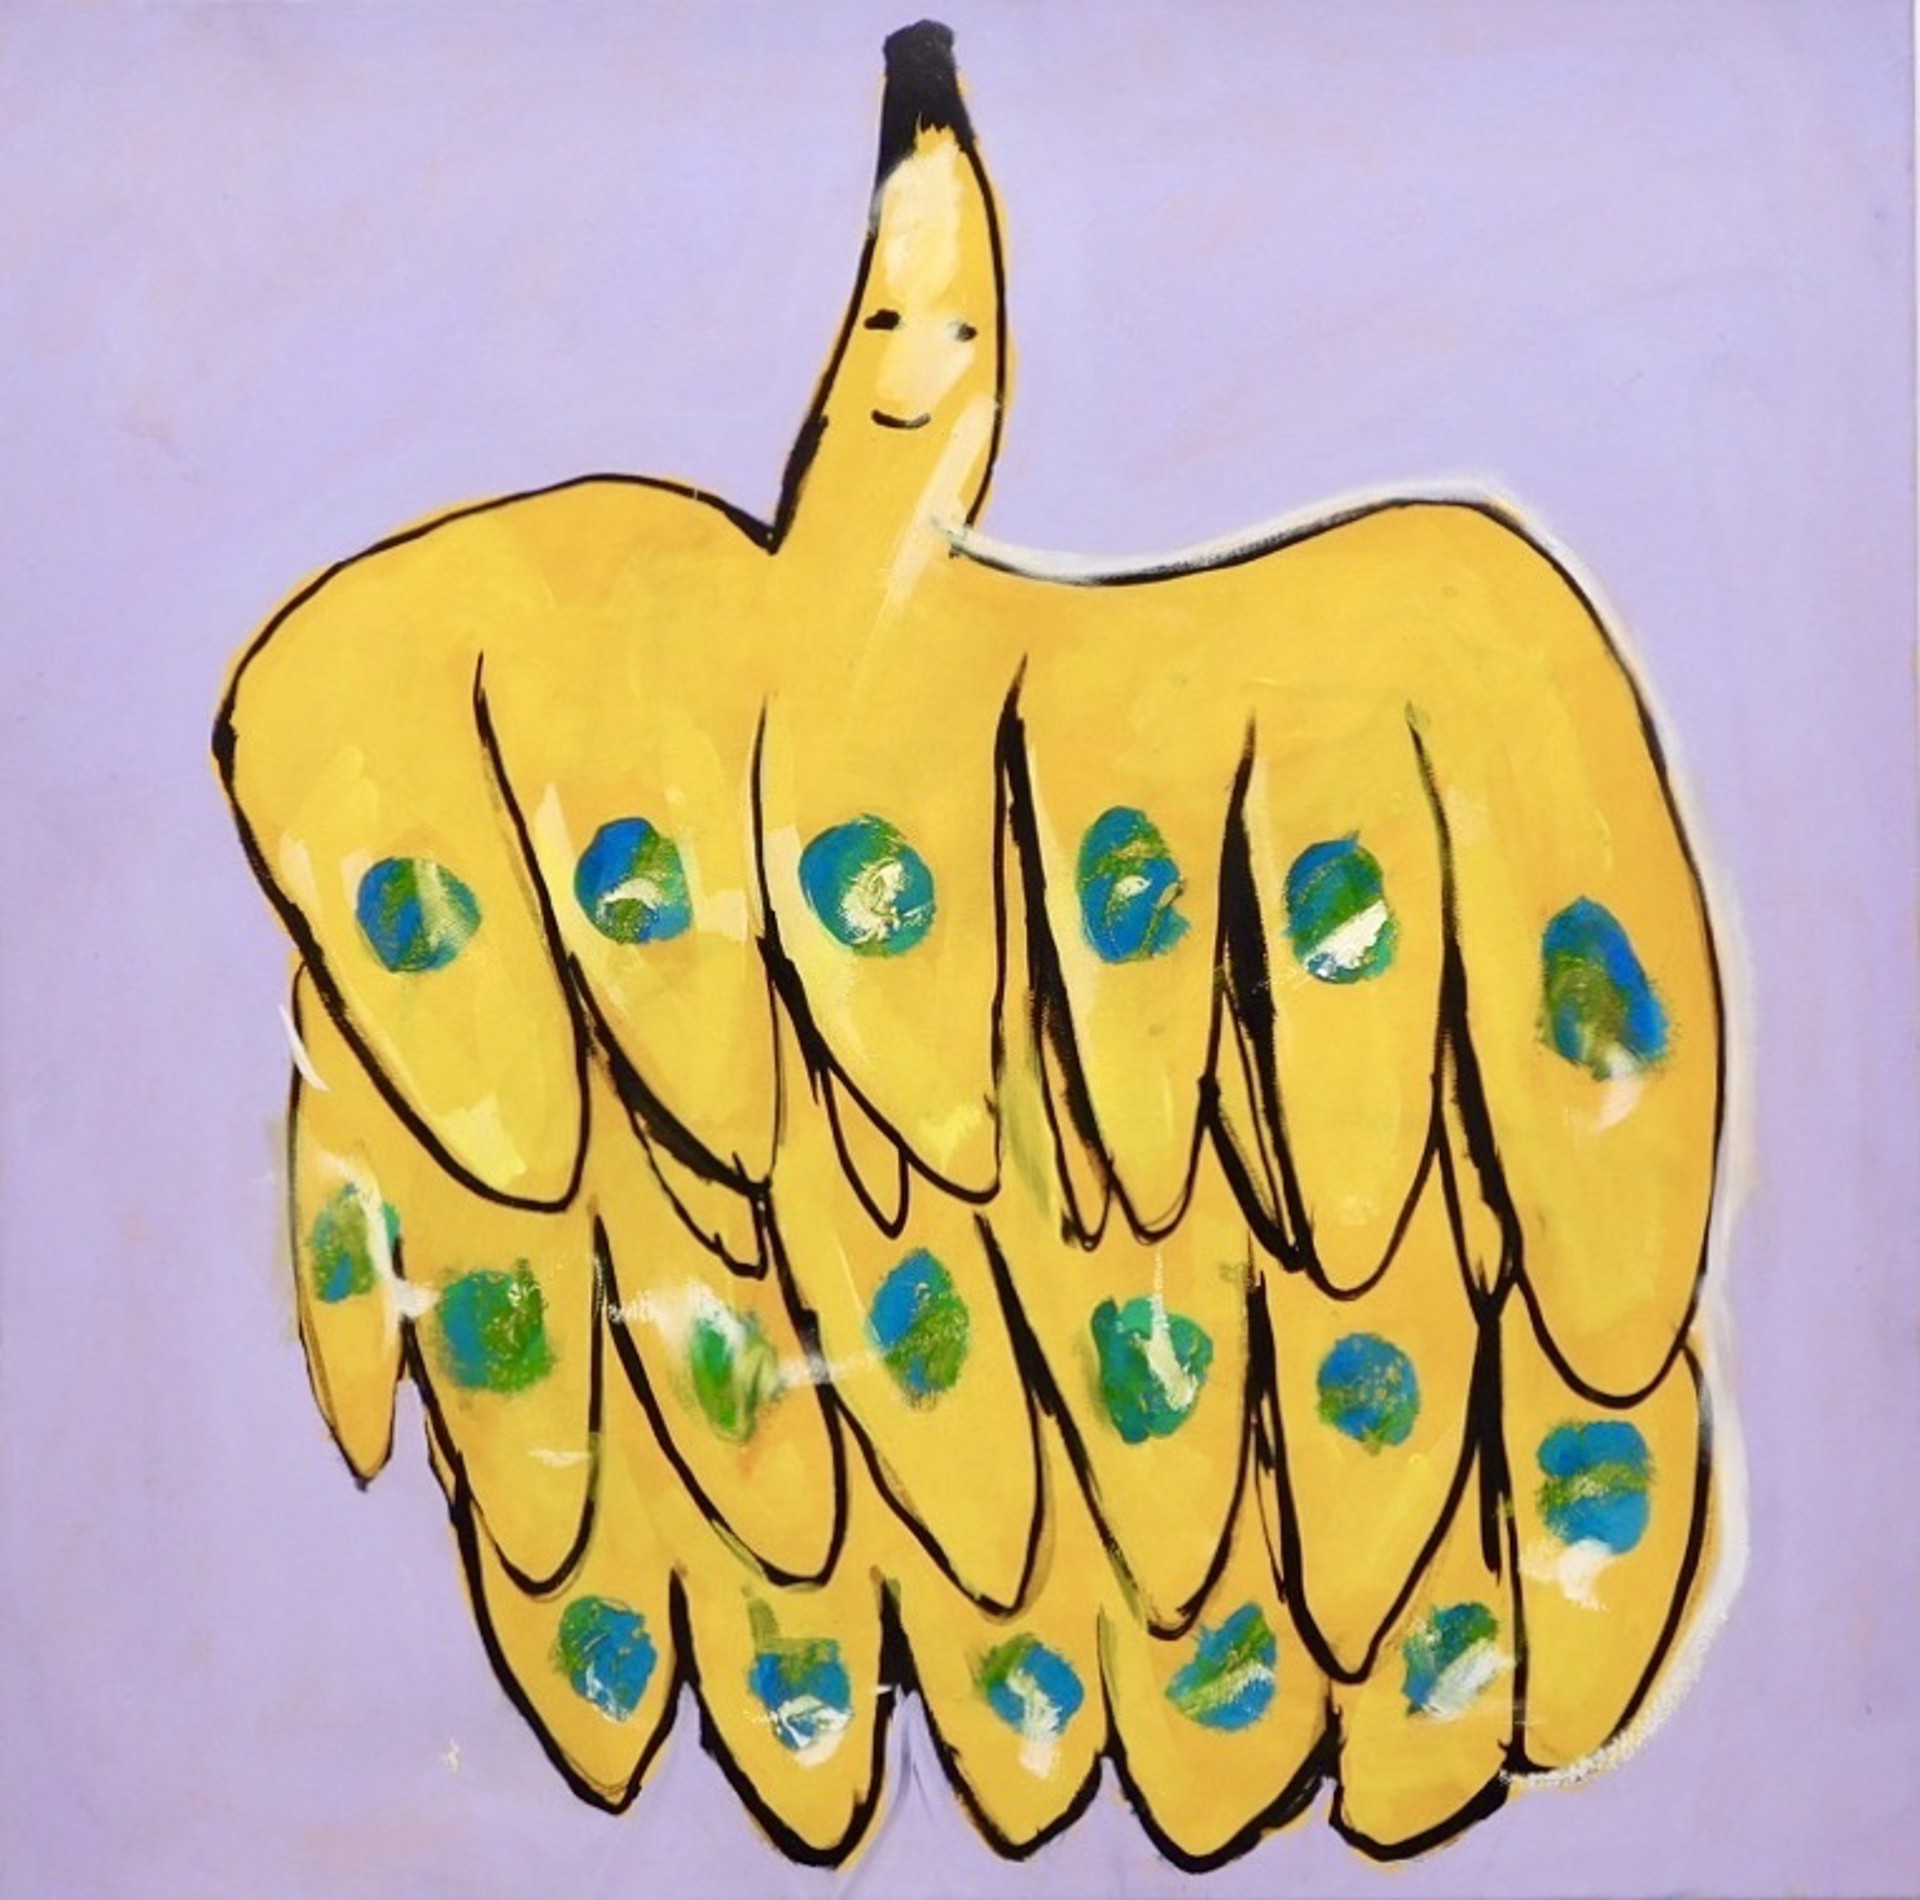 Squished Banana by Brian Leo